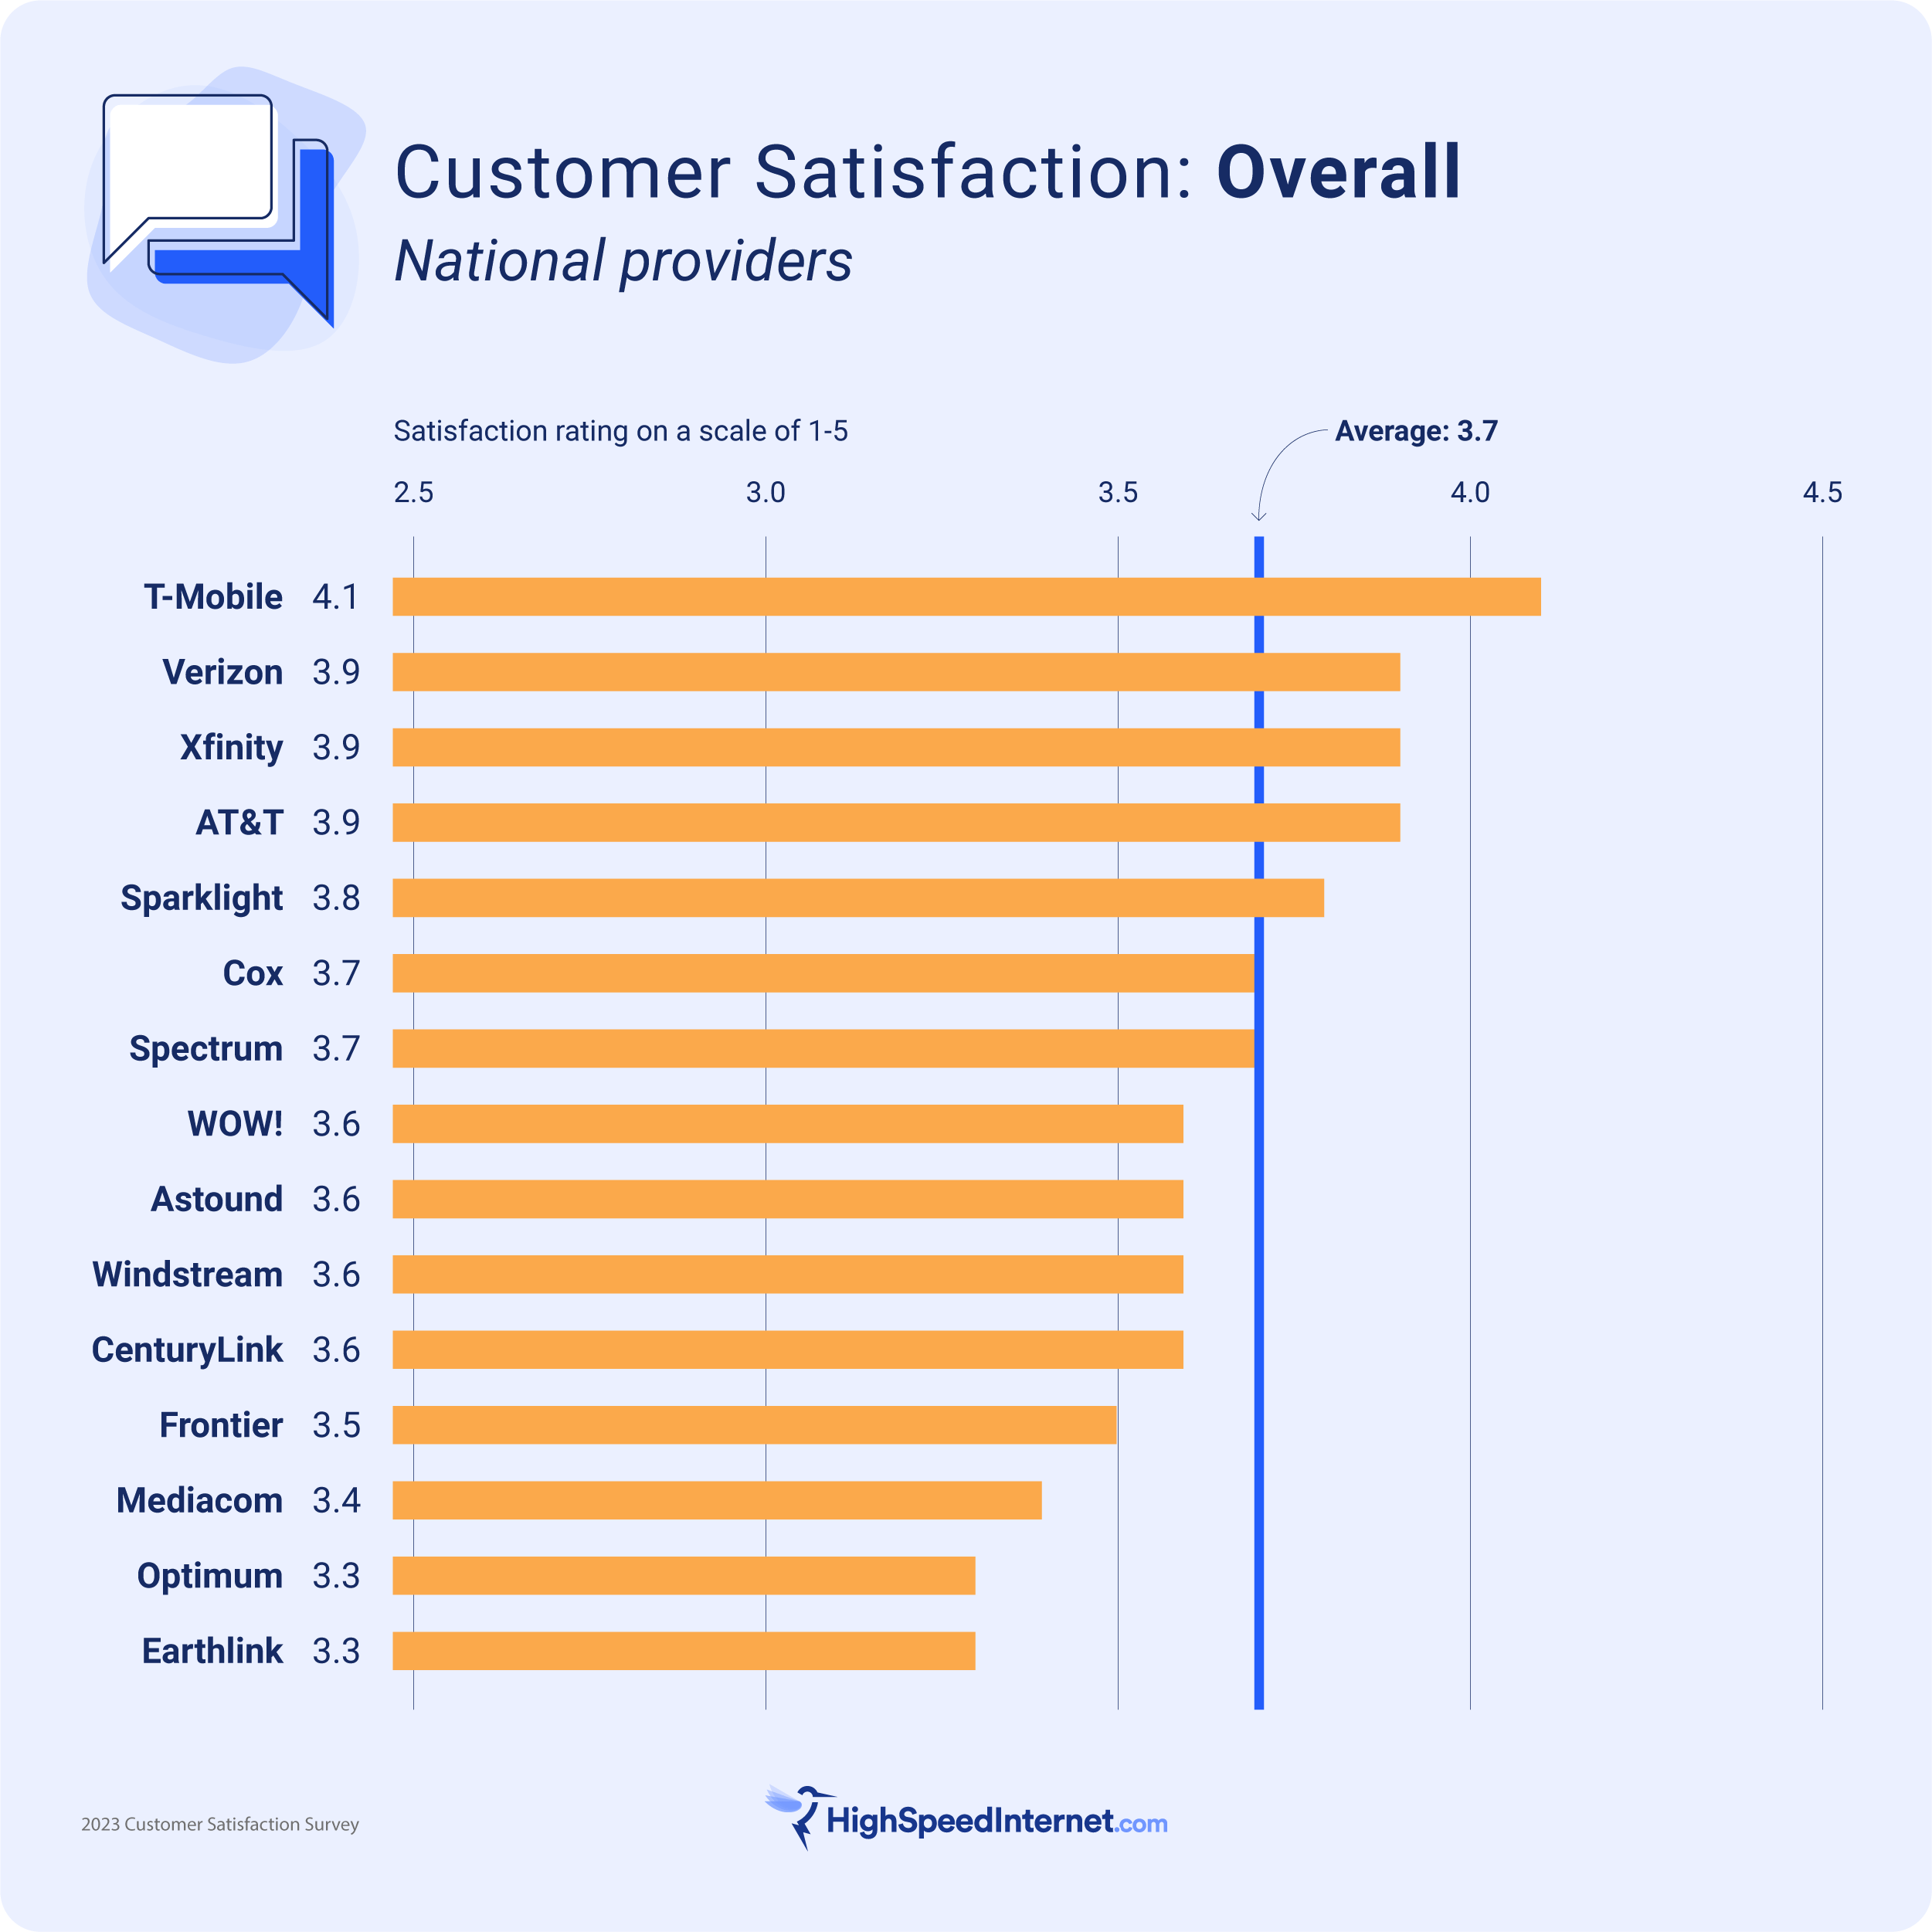 T-Mobile, Verizon, Xfinity, and AT&T are at the top of the chart for overall customer satisfaction